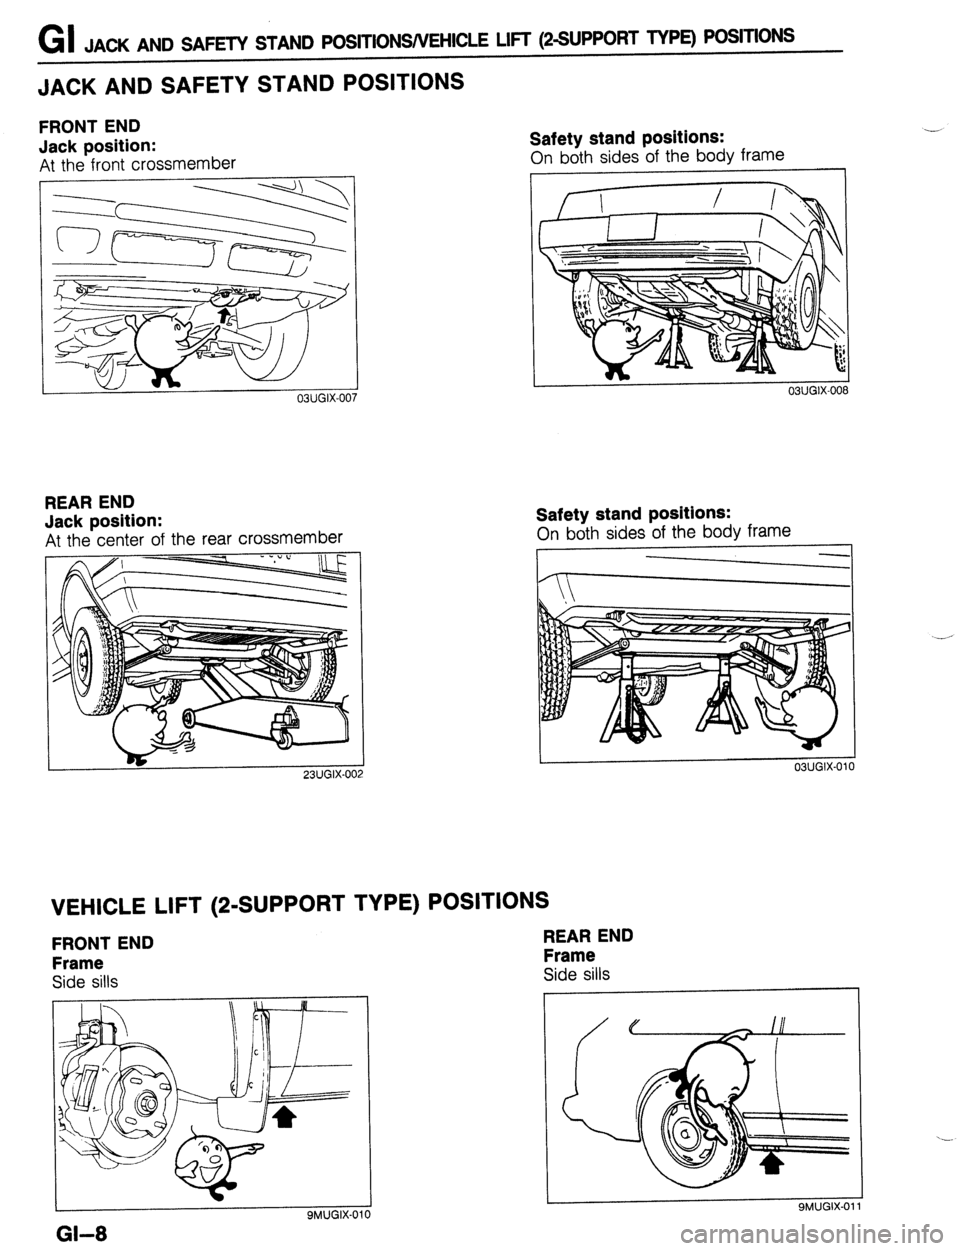 MAZDA 323 1989  Factory Repair Manual GI JACK AND SAFETY STAND POSITIONS/VEHICLE LIFT (2-SUPPORT TYPE) POSITIONS 
JACK AND SAFETY STAND POSITIONS 
FRONT END 
Jack position: 
At the front crossmember 
1 03UGIX-007 
REAR END 
Jack position: